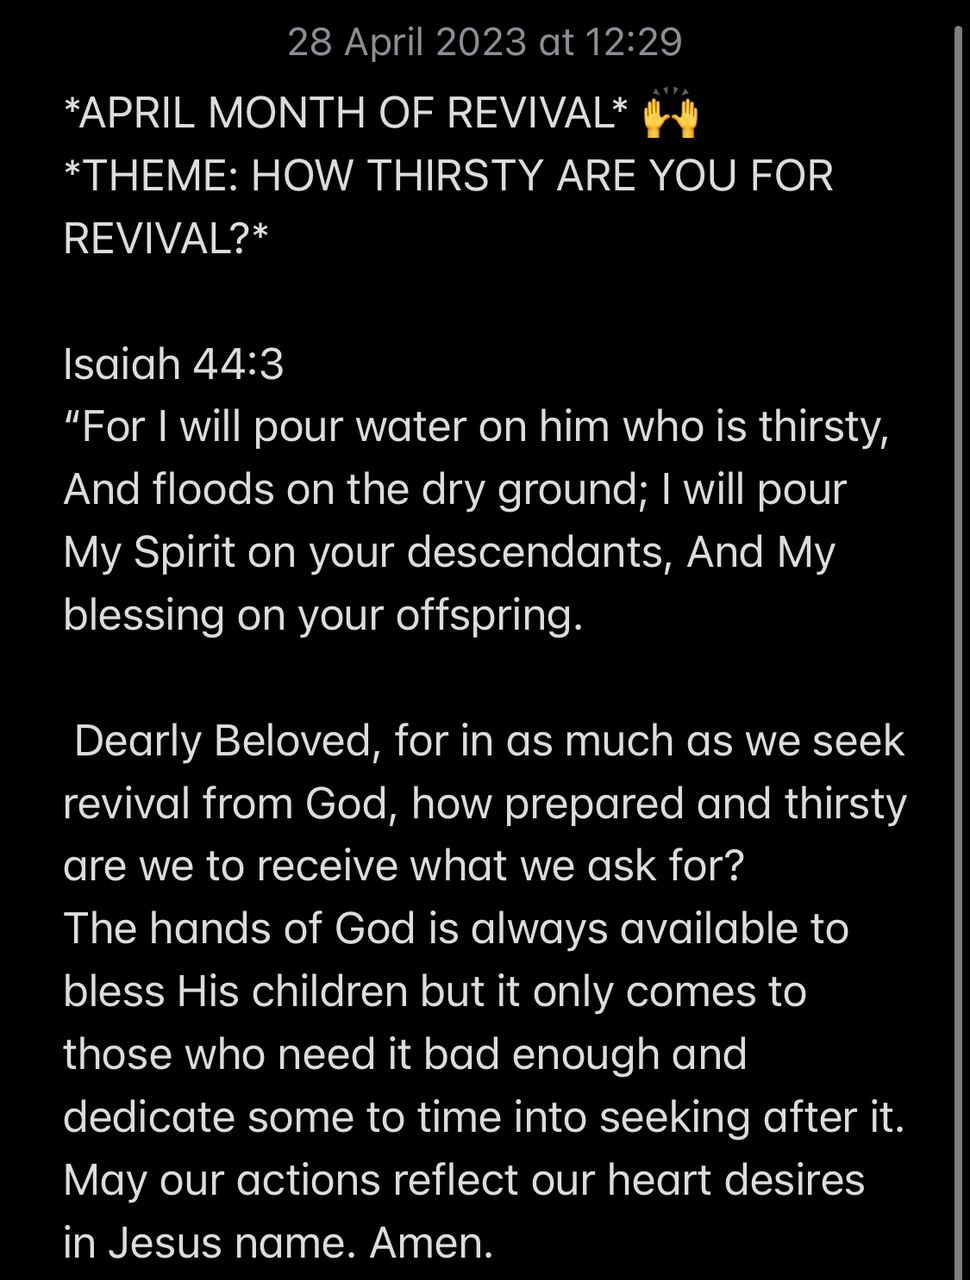 HOW THIRSTY ARE YOU TO BE REVIVED?